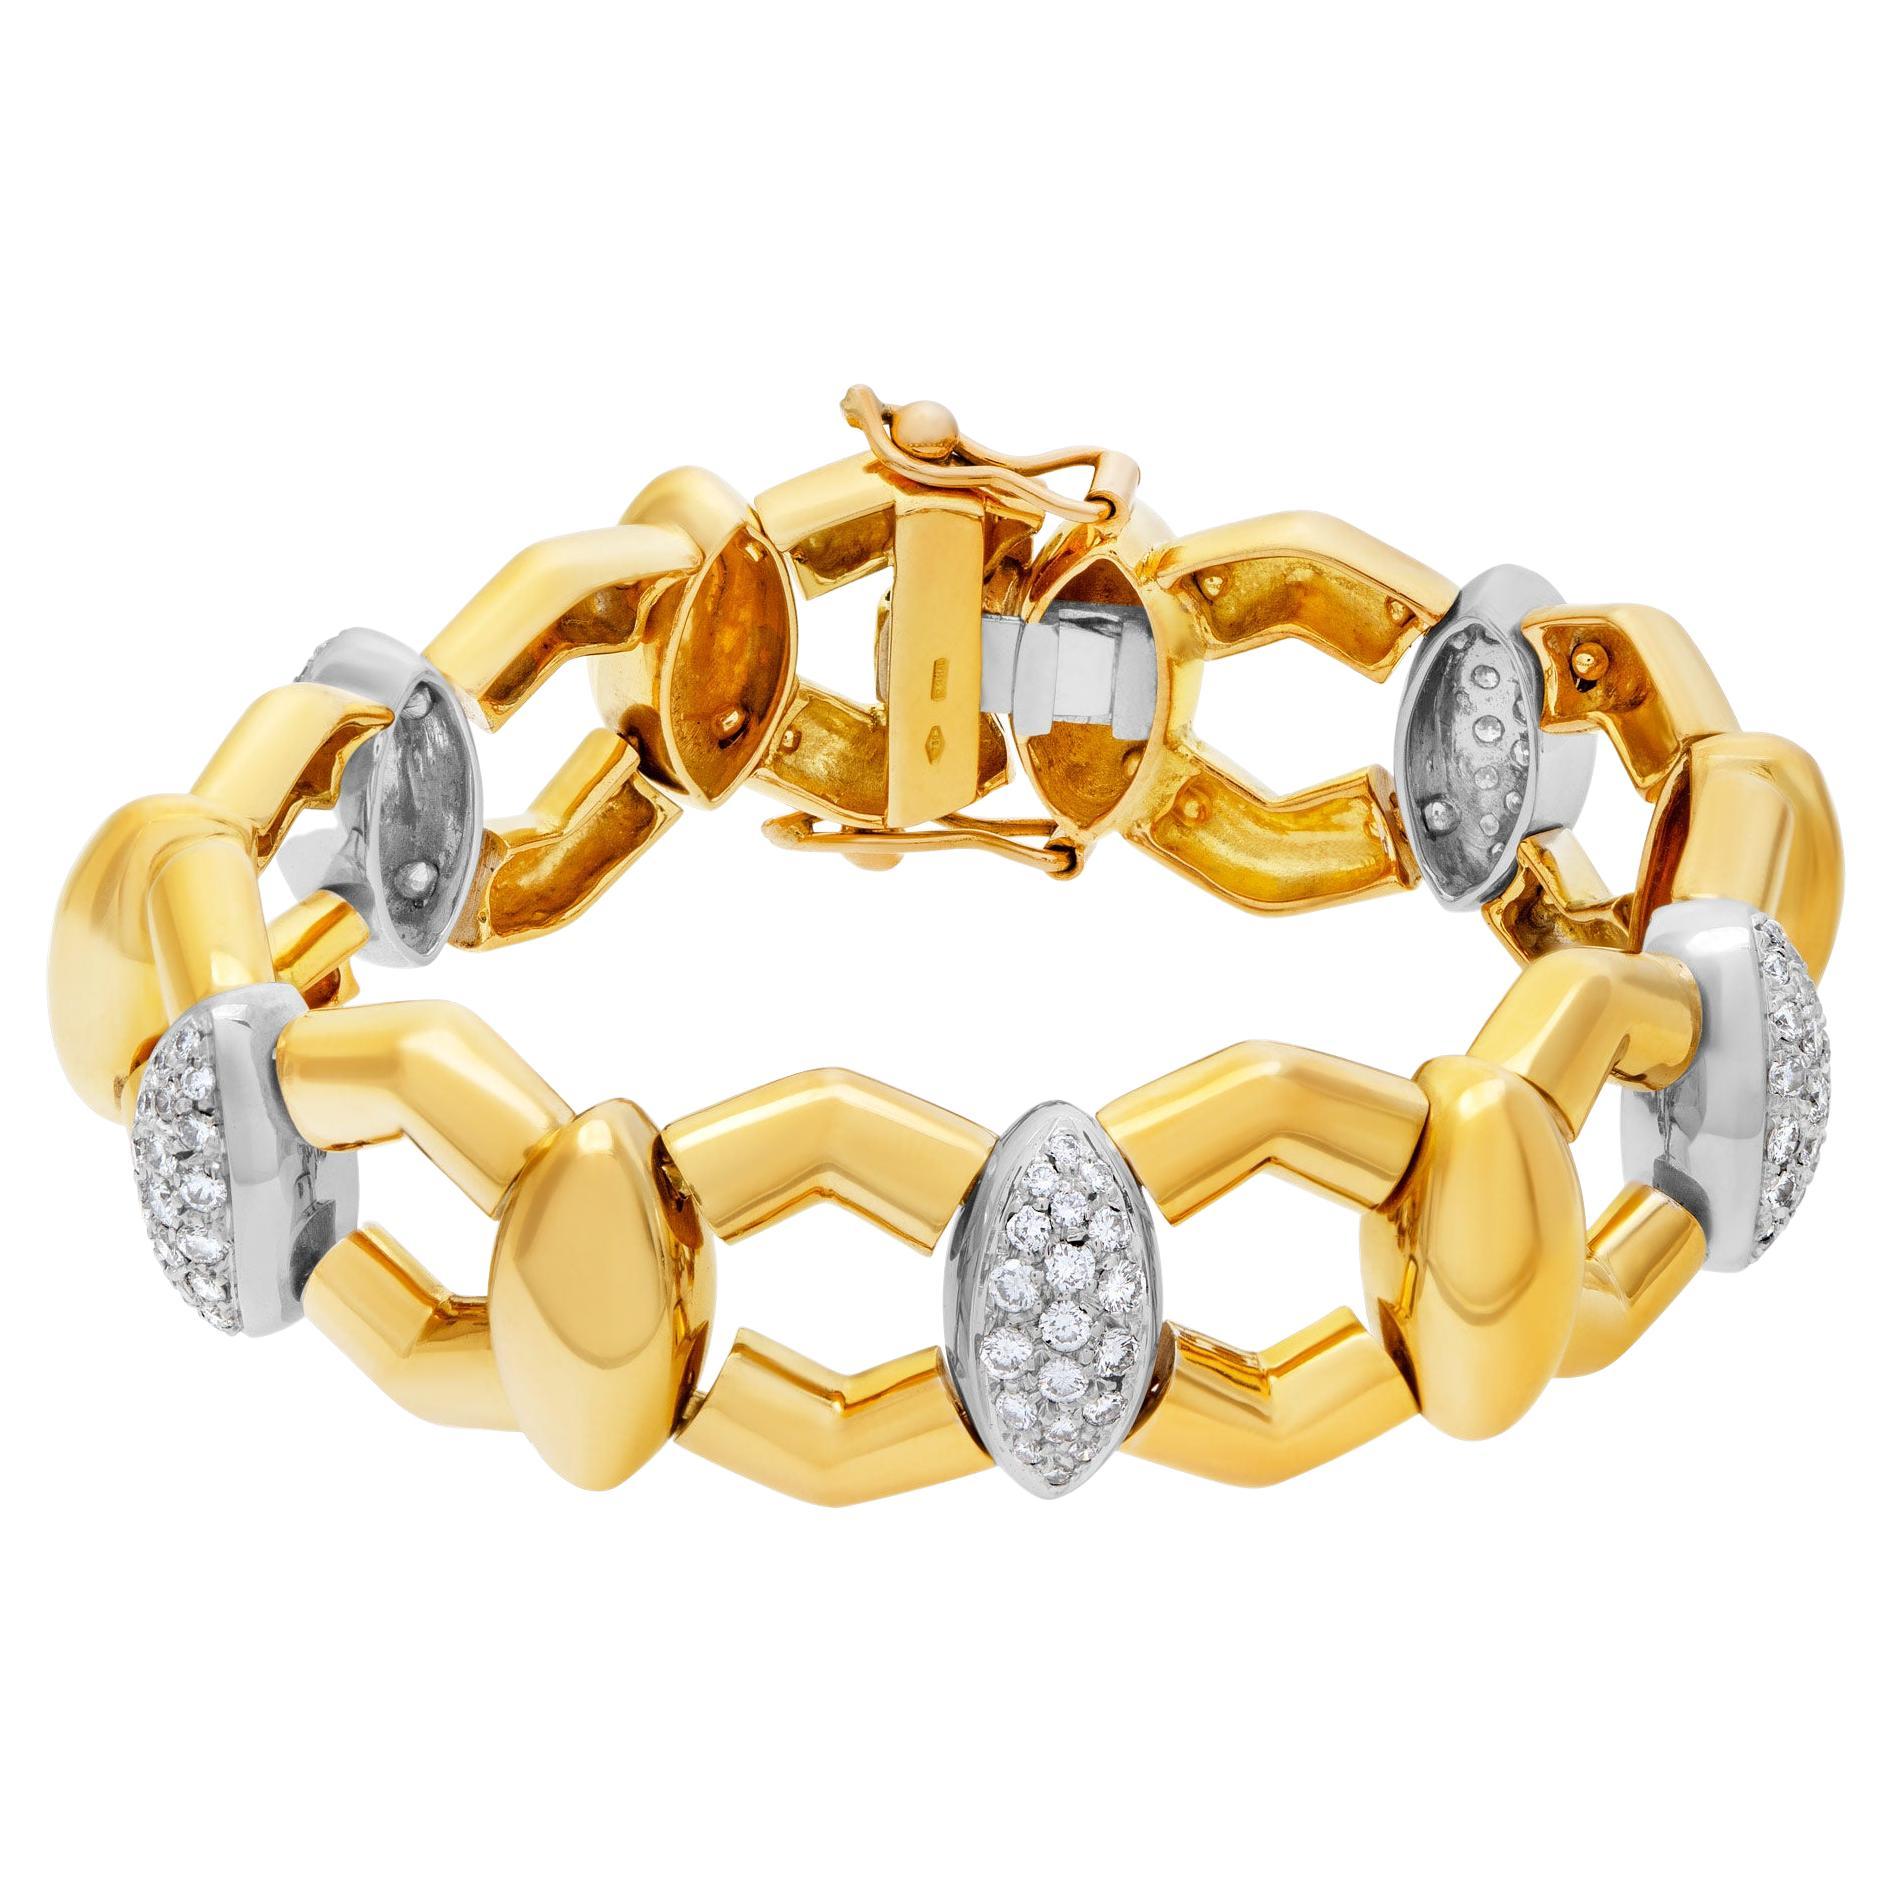 Diamond bracelet set in 18k yellow gold approximately 2.35 carats in diamonds For Sale